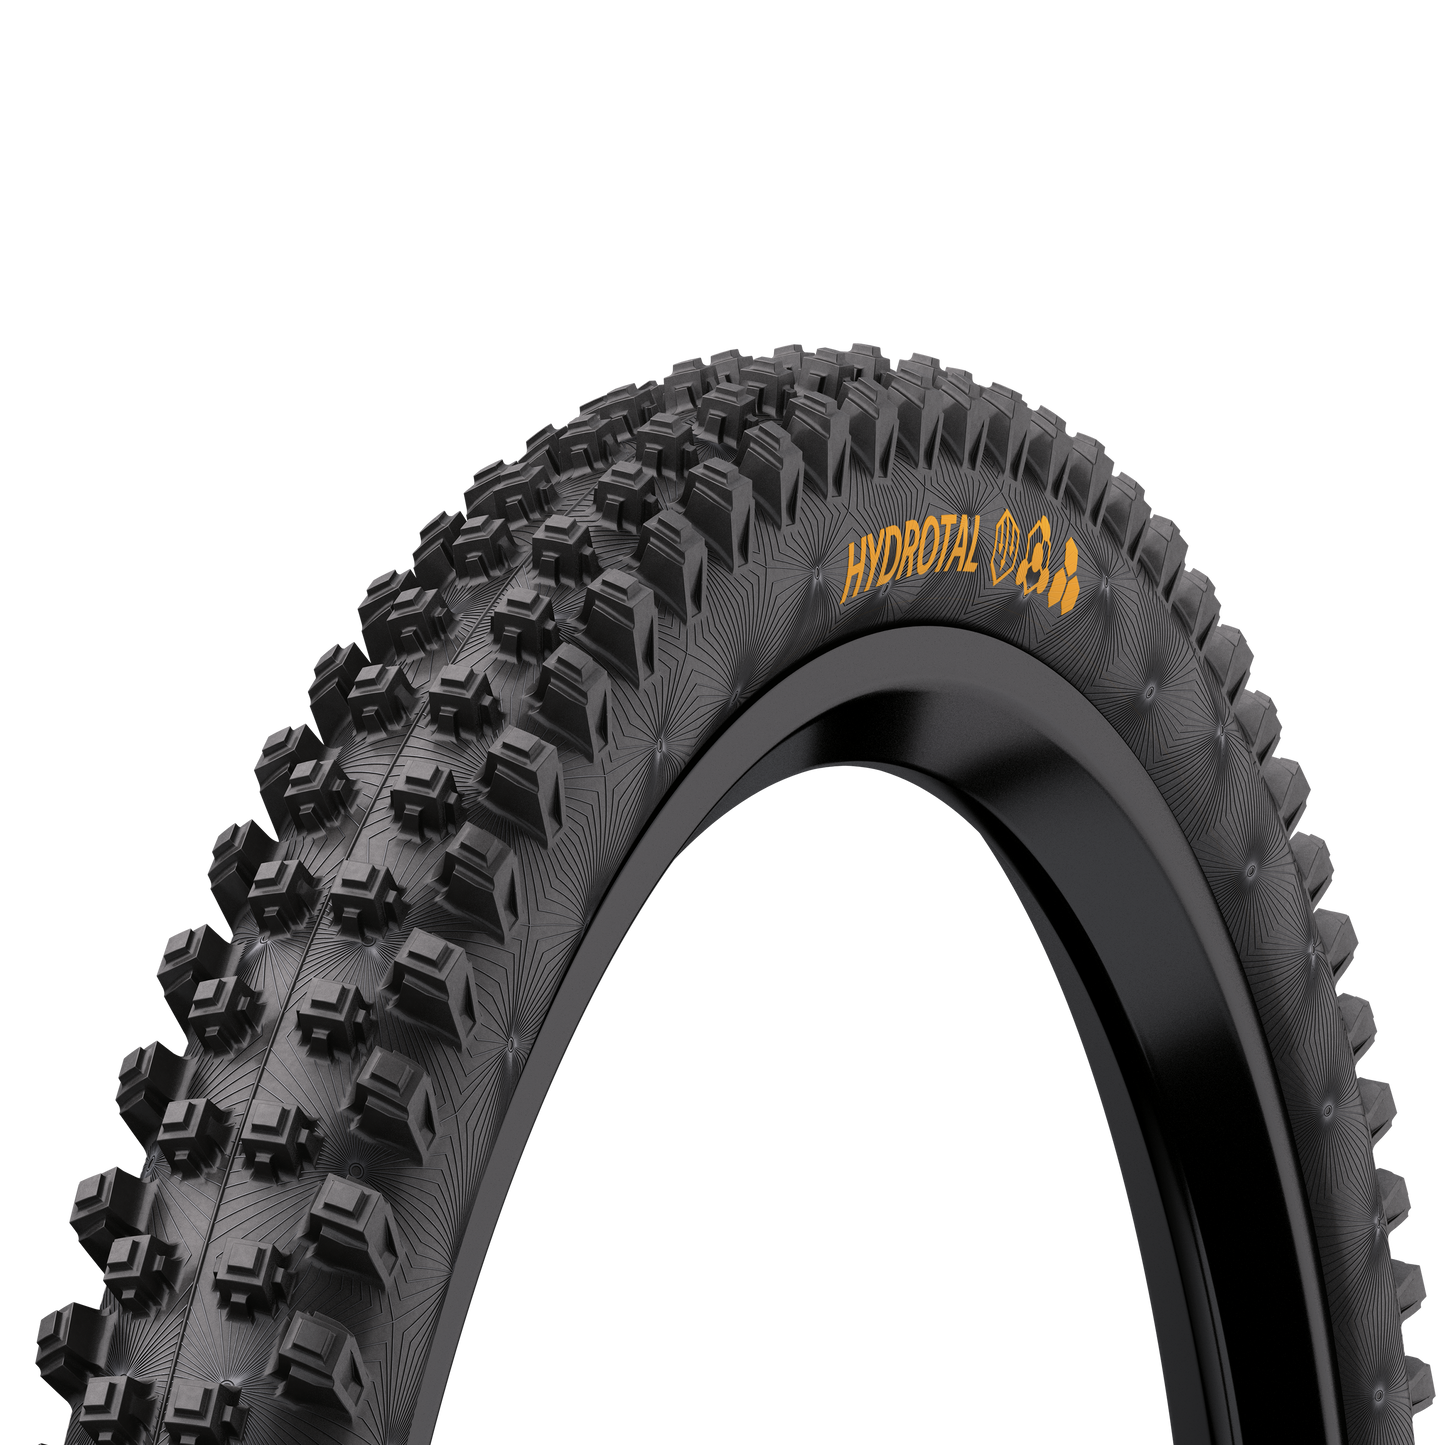 Continental Hydrotal Downhill Tyre